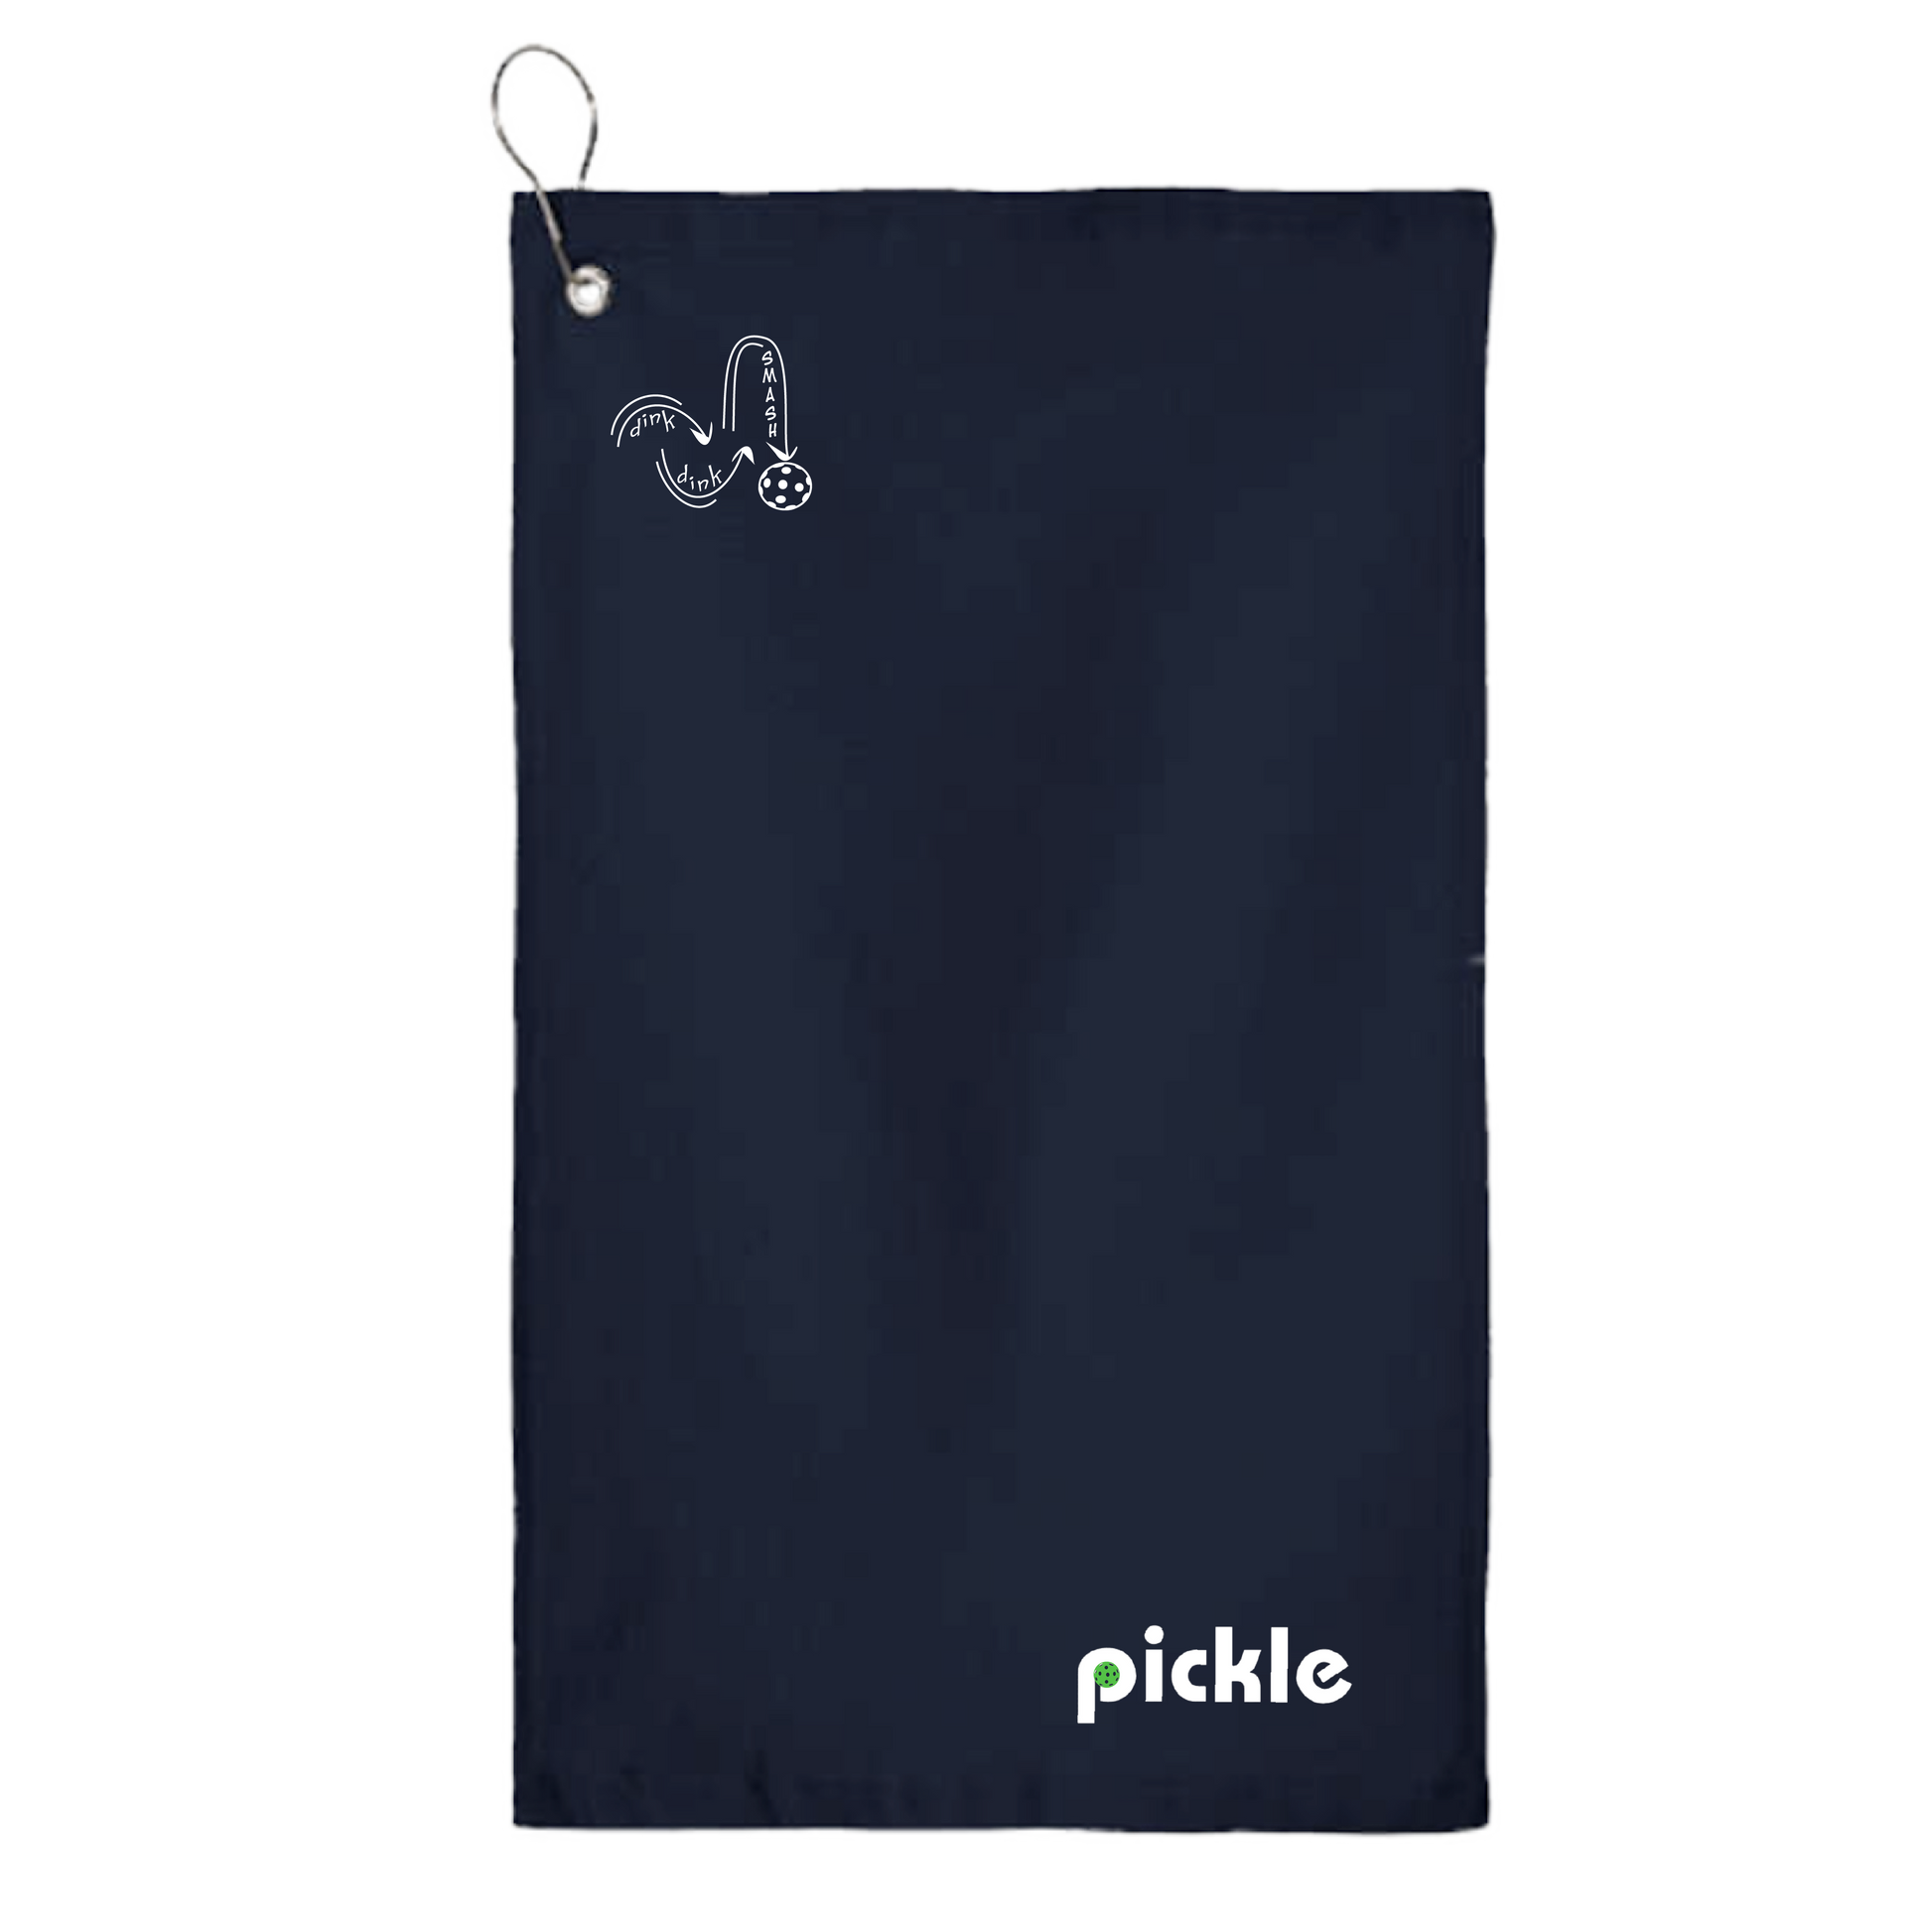 This pickleball towel is crafted with cotton terry velour for optimal performance. It features grommets, hooks, and hemmed edges for added durability. It's perfect for completing your pickleball gear, and an ideal gift for friends and tournaments. The towel is designed to be both absorbent and lightweight, so you can remain dry and comfortable while you play. Plus, its long-lasting power will keep it looking great and working well for many games to come.